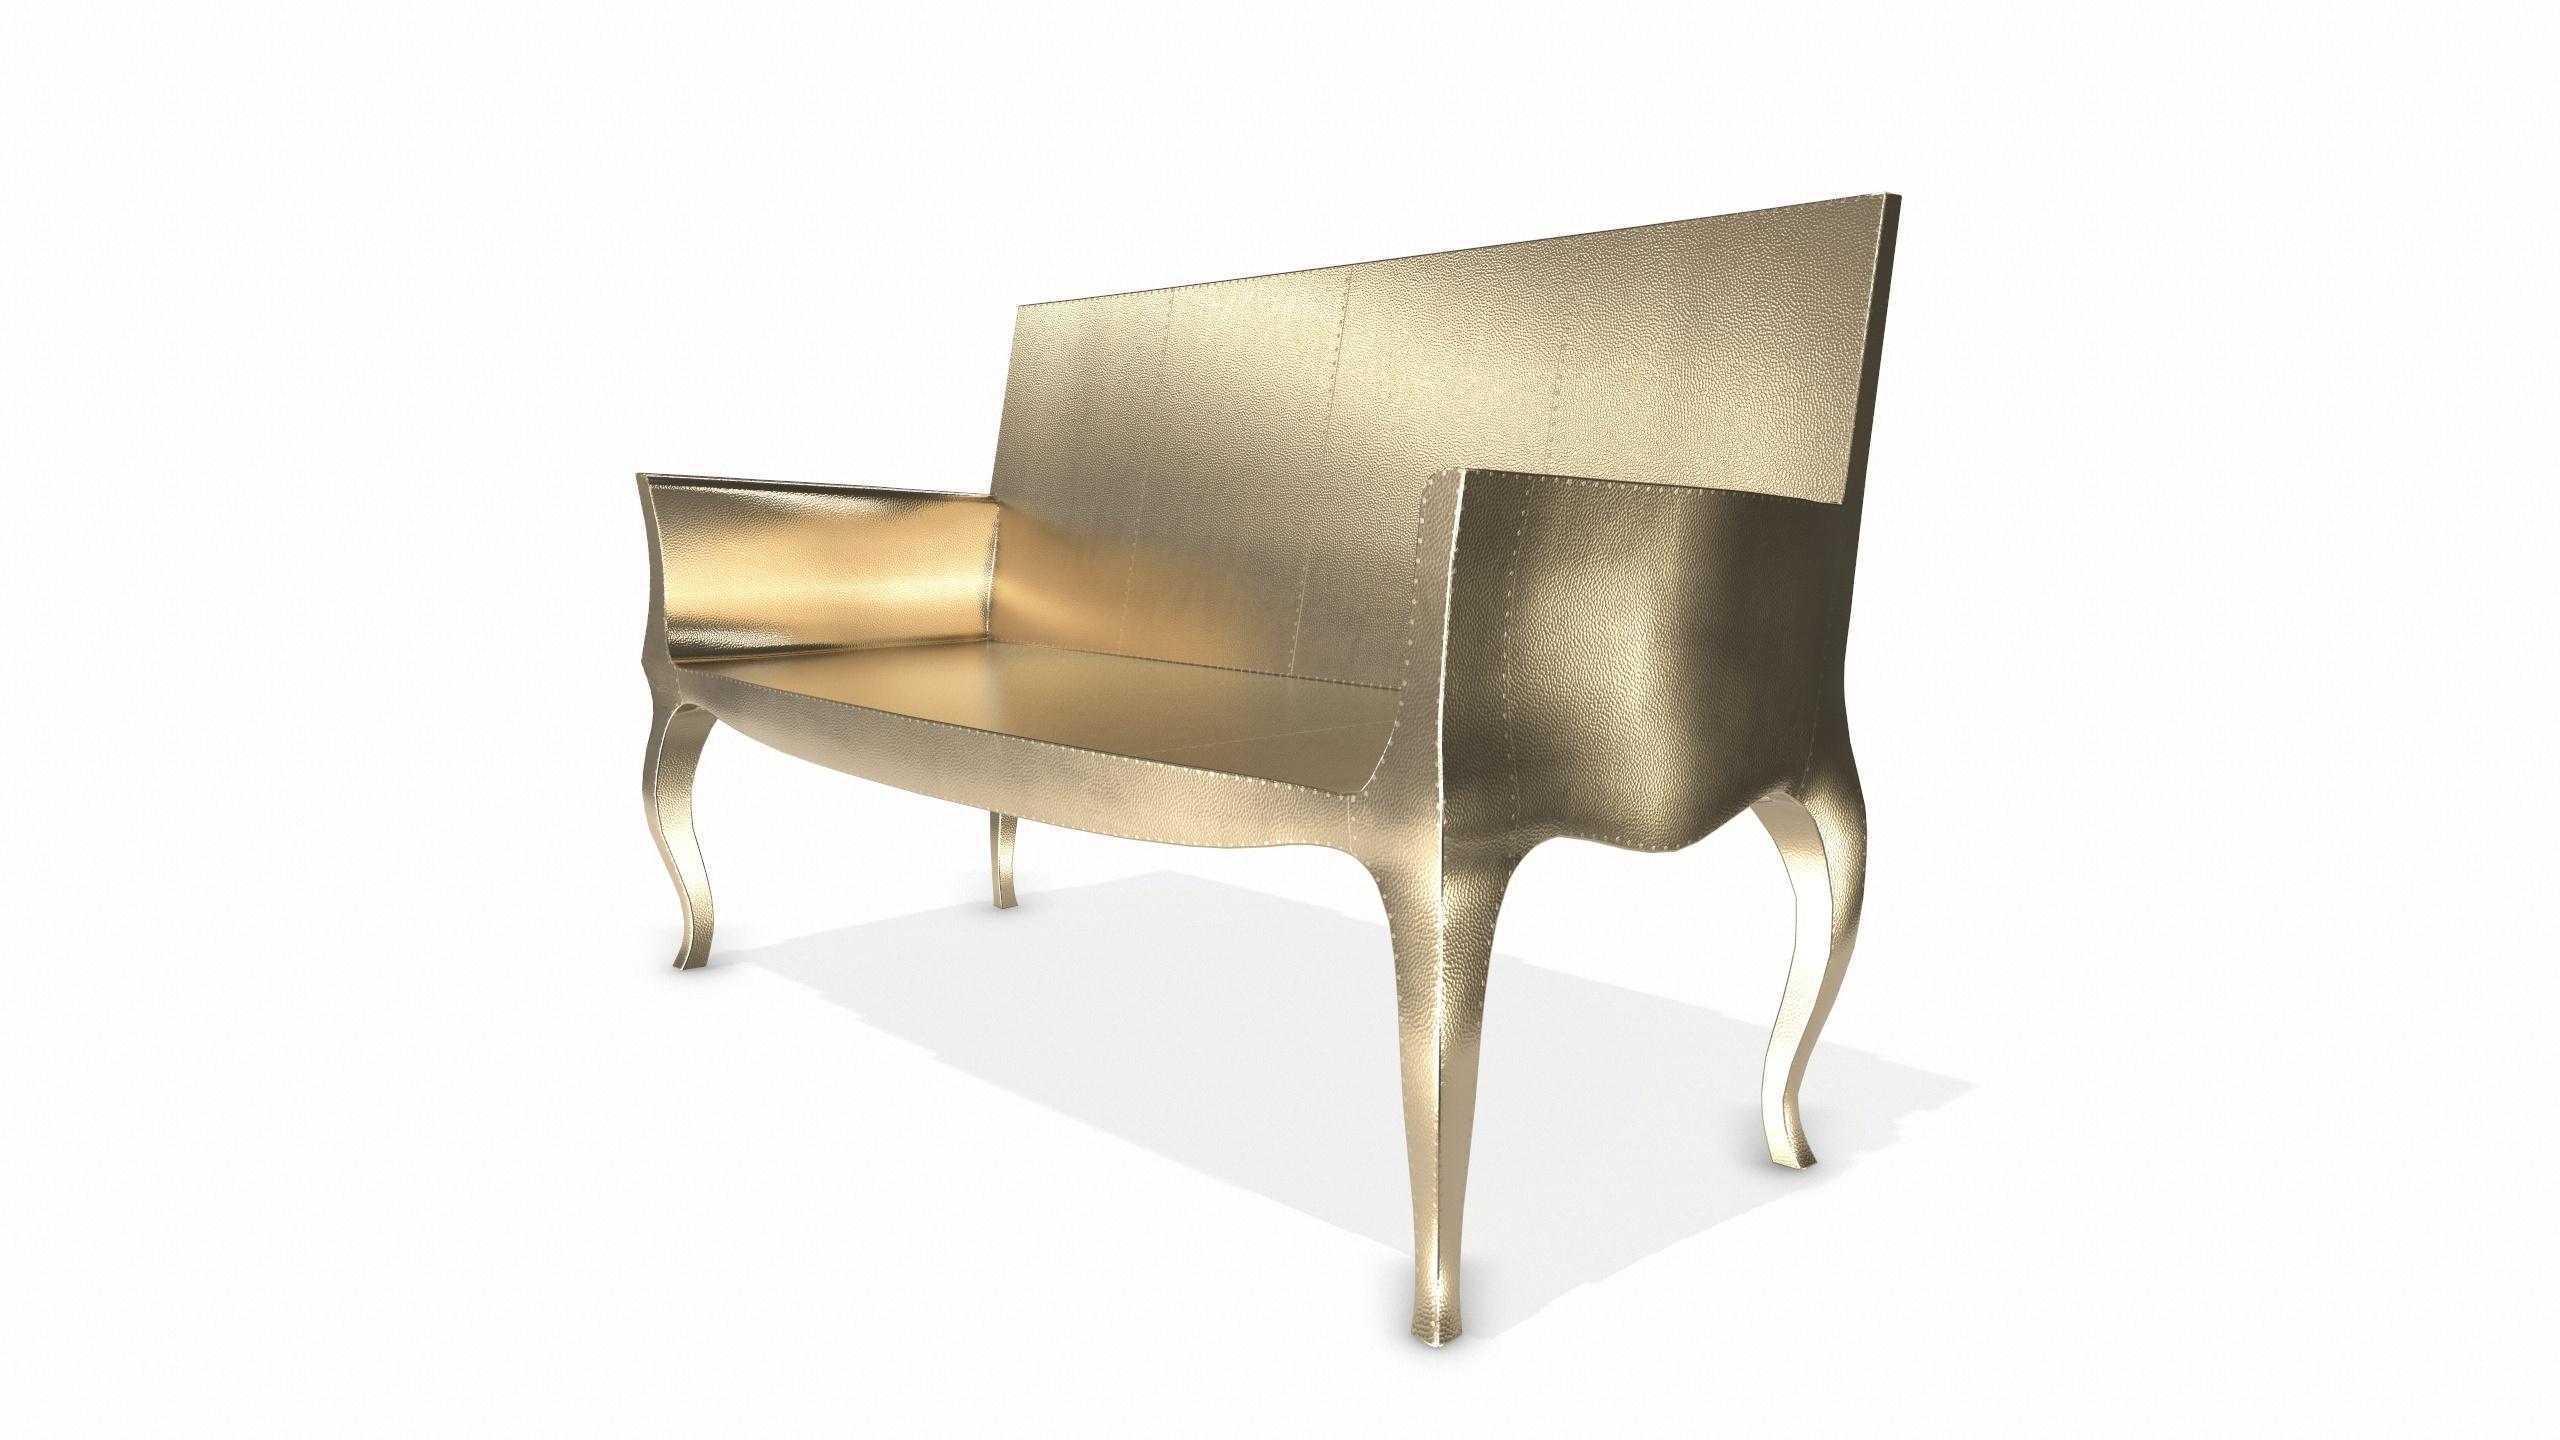 Hand-Crafted Louise Settee Art Deco Benches in Mid. Hammered Brass by Paul Mathieu For Sale